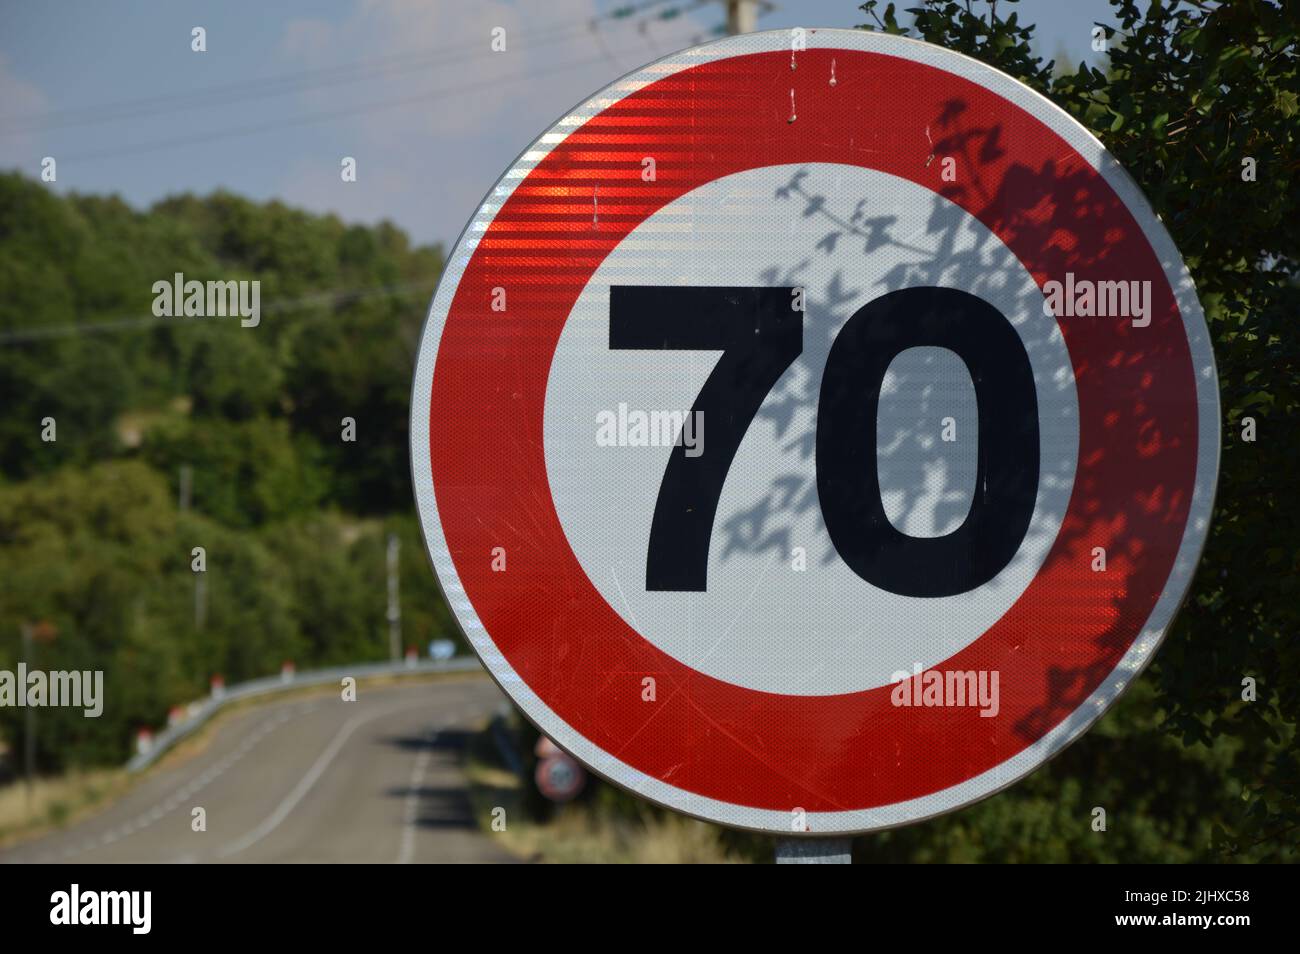 Speed limit sign from france Stock Photo